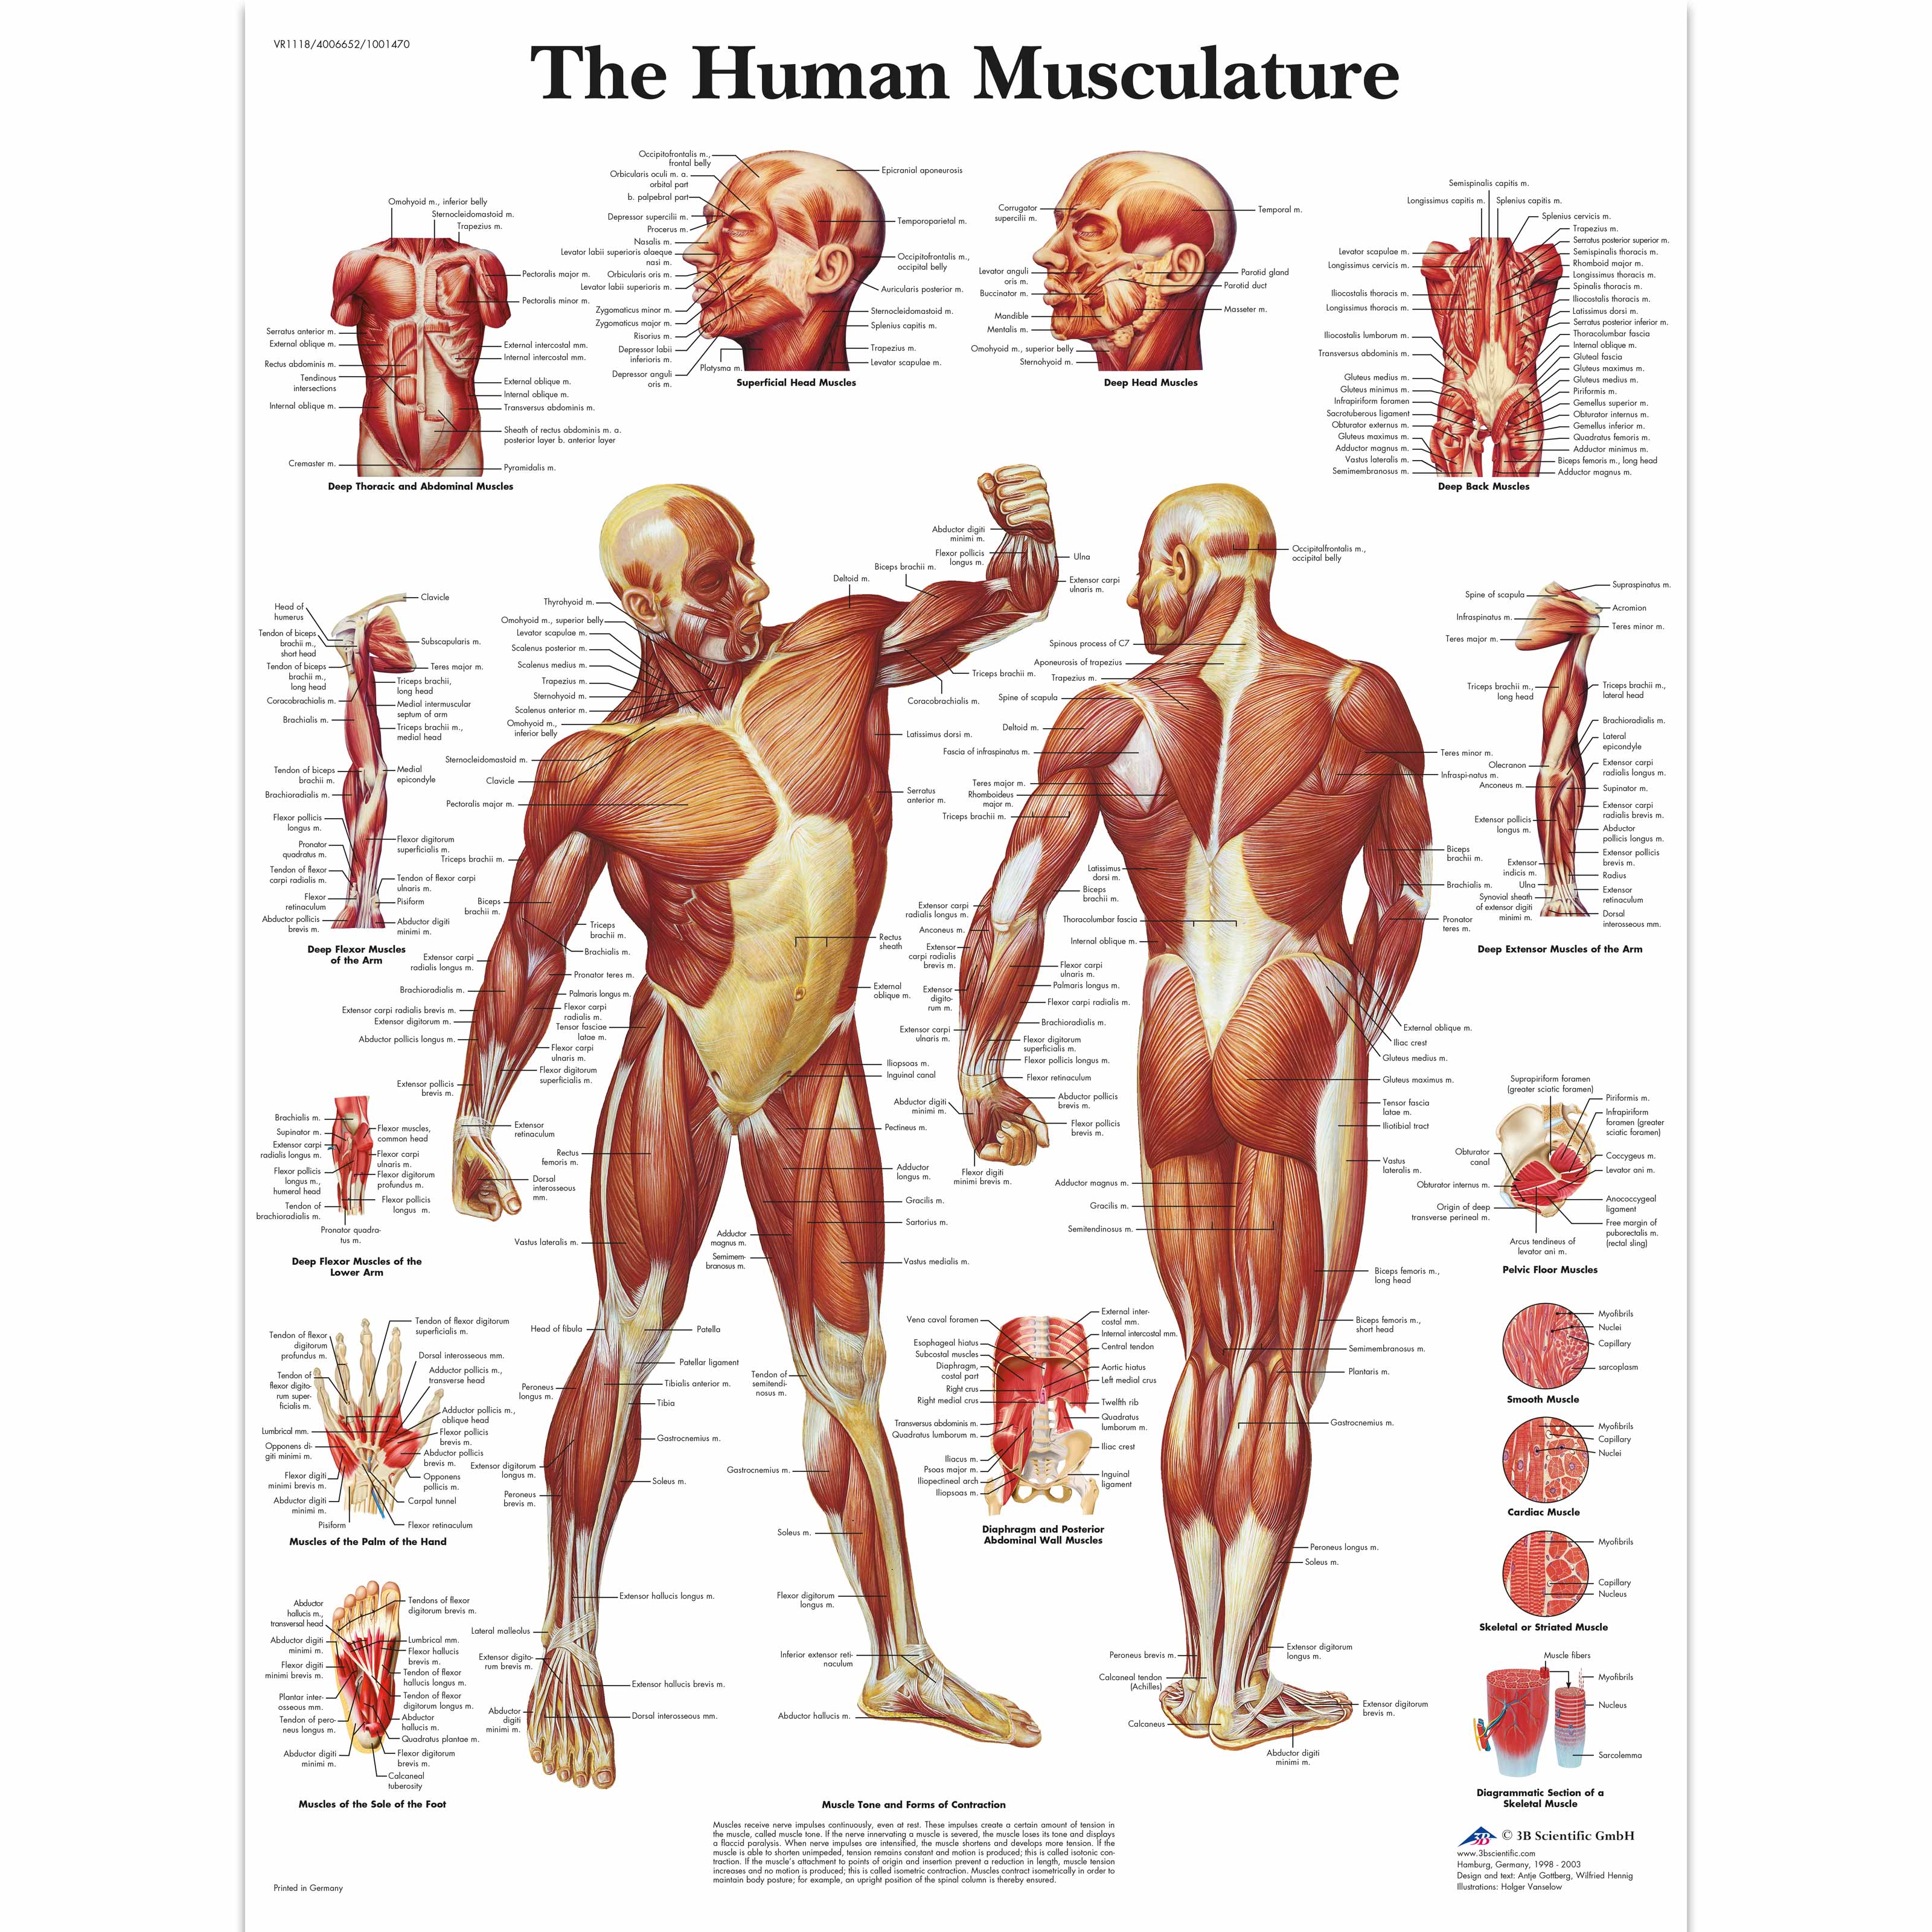 Human Muscle Chart | Human Muscle | Human Musculature Chart | Muscular System Poster Laminated